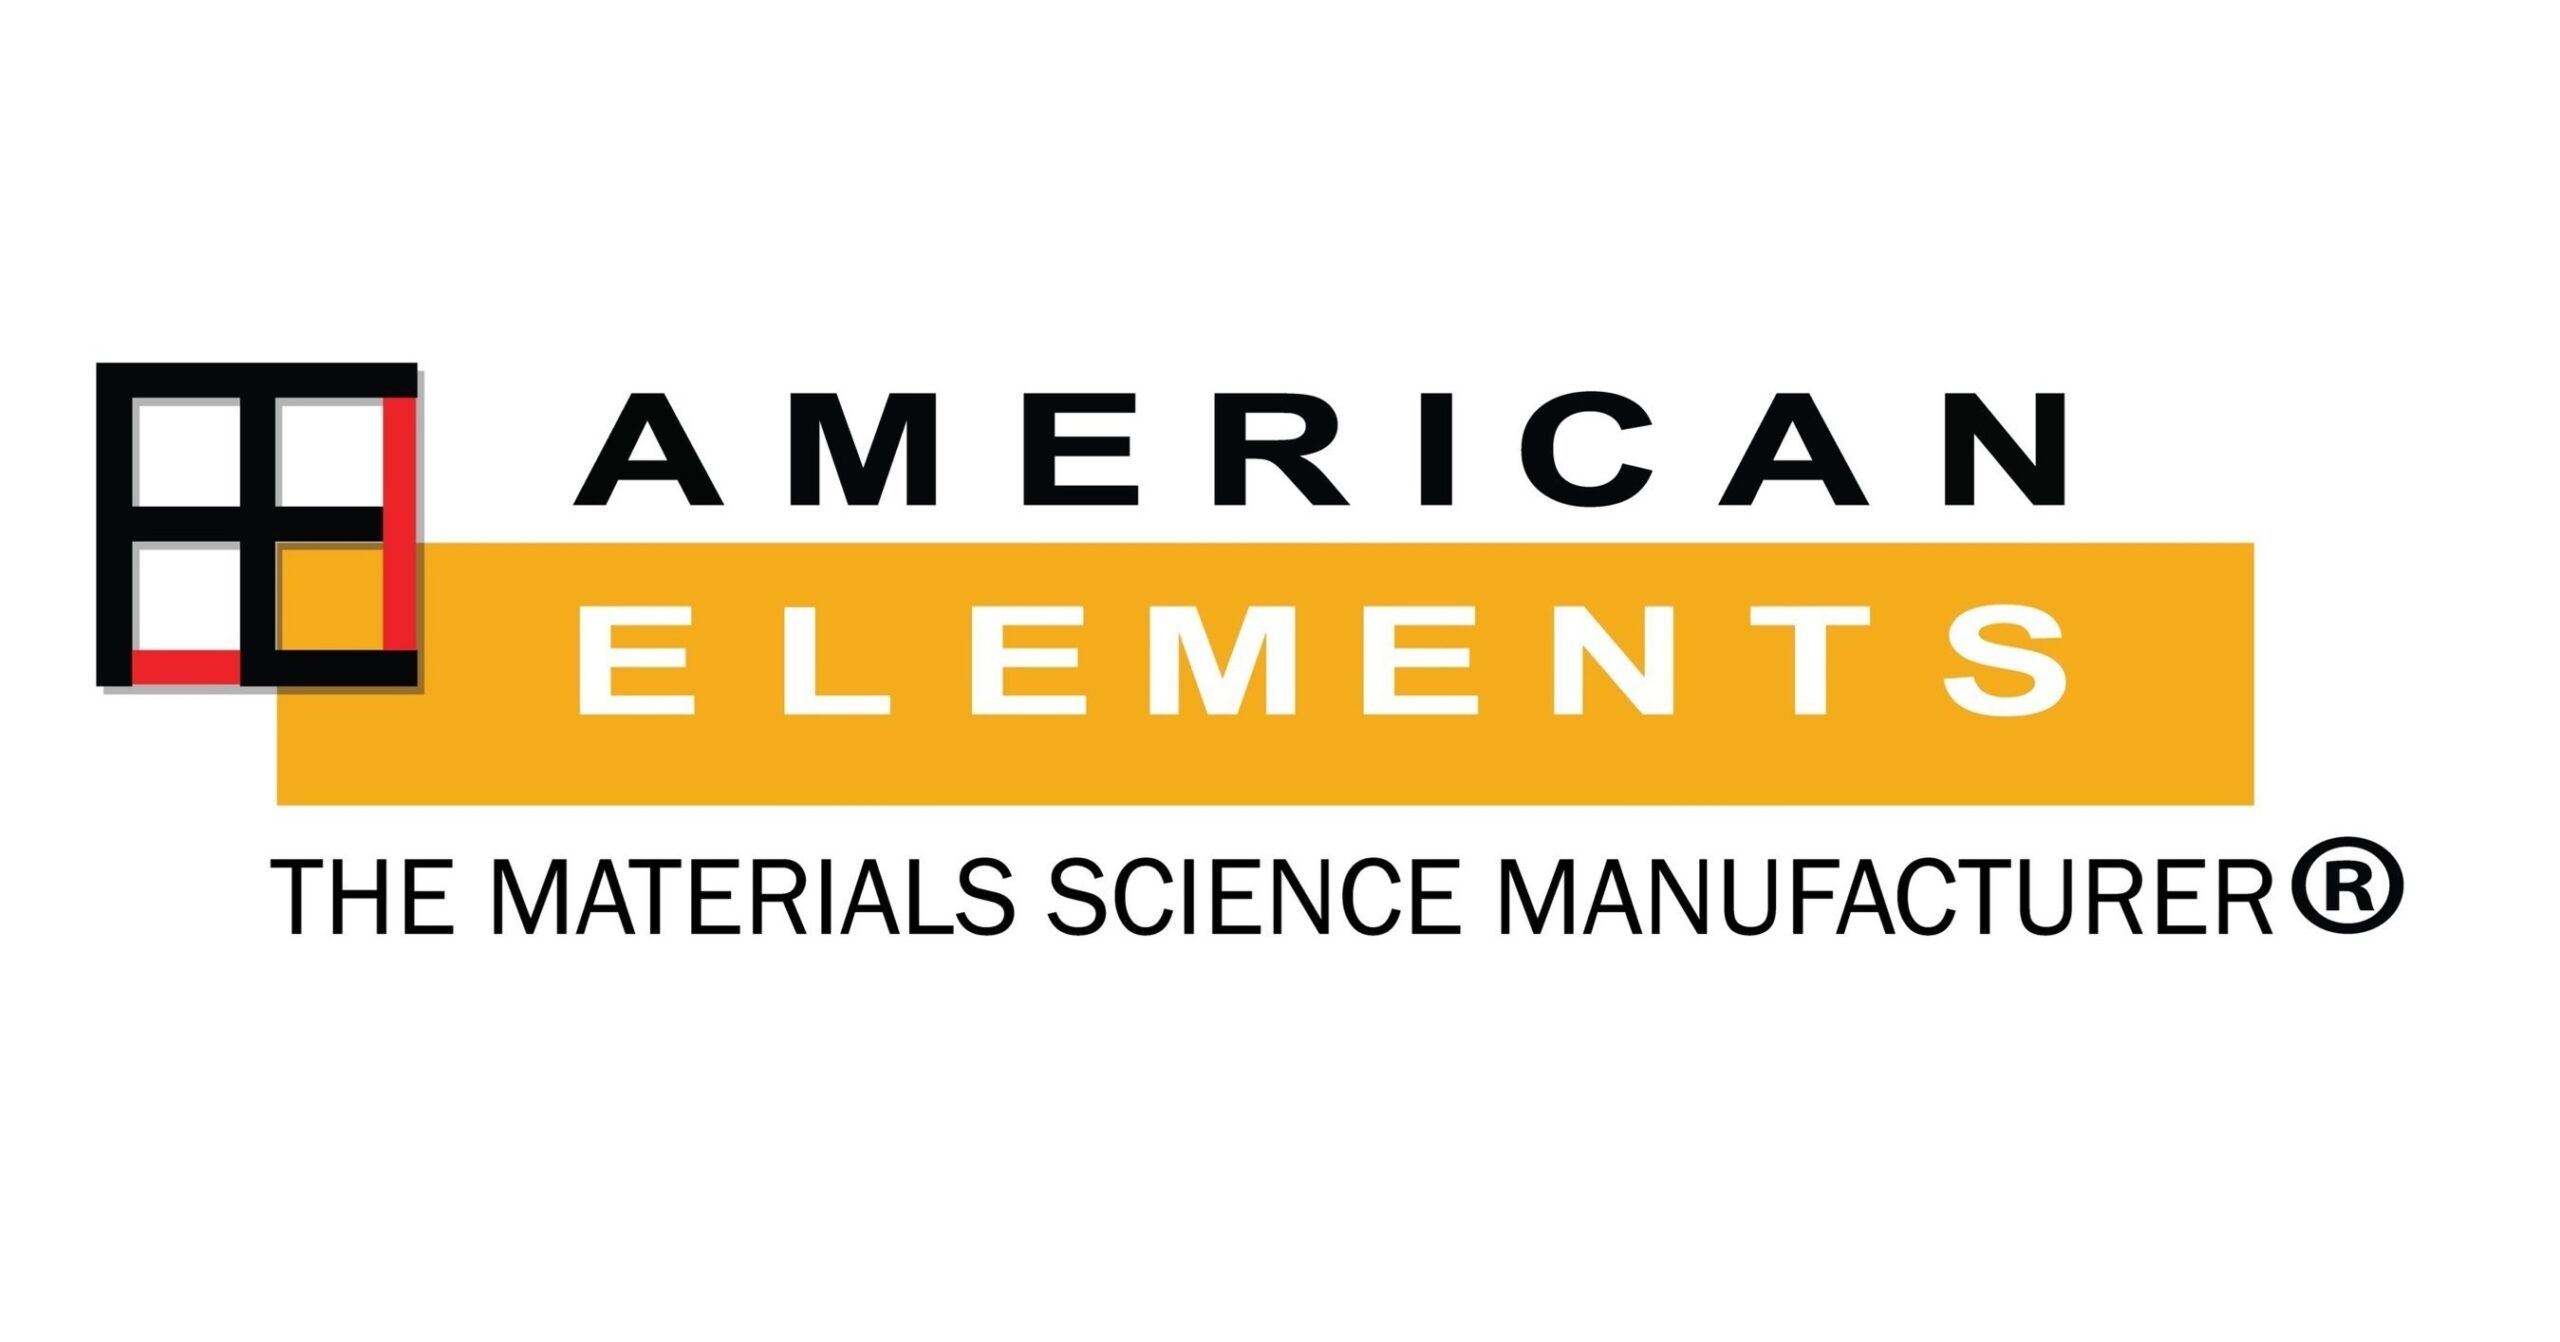 American Elements, global manufacturer of aluminum alloys, rare earth metals, & advanced materials for the metallurgy industry